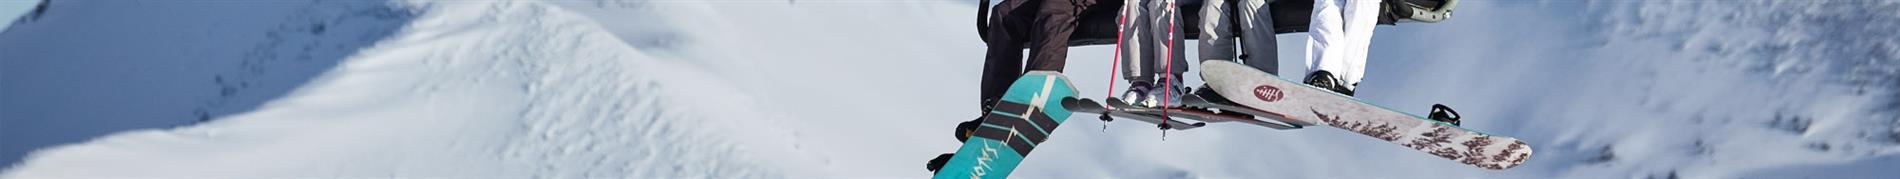 Nils Women's skis, snowboards, and accessories for everything snow. 